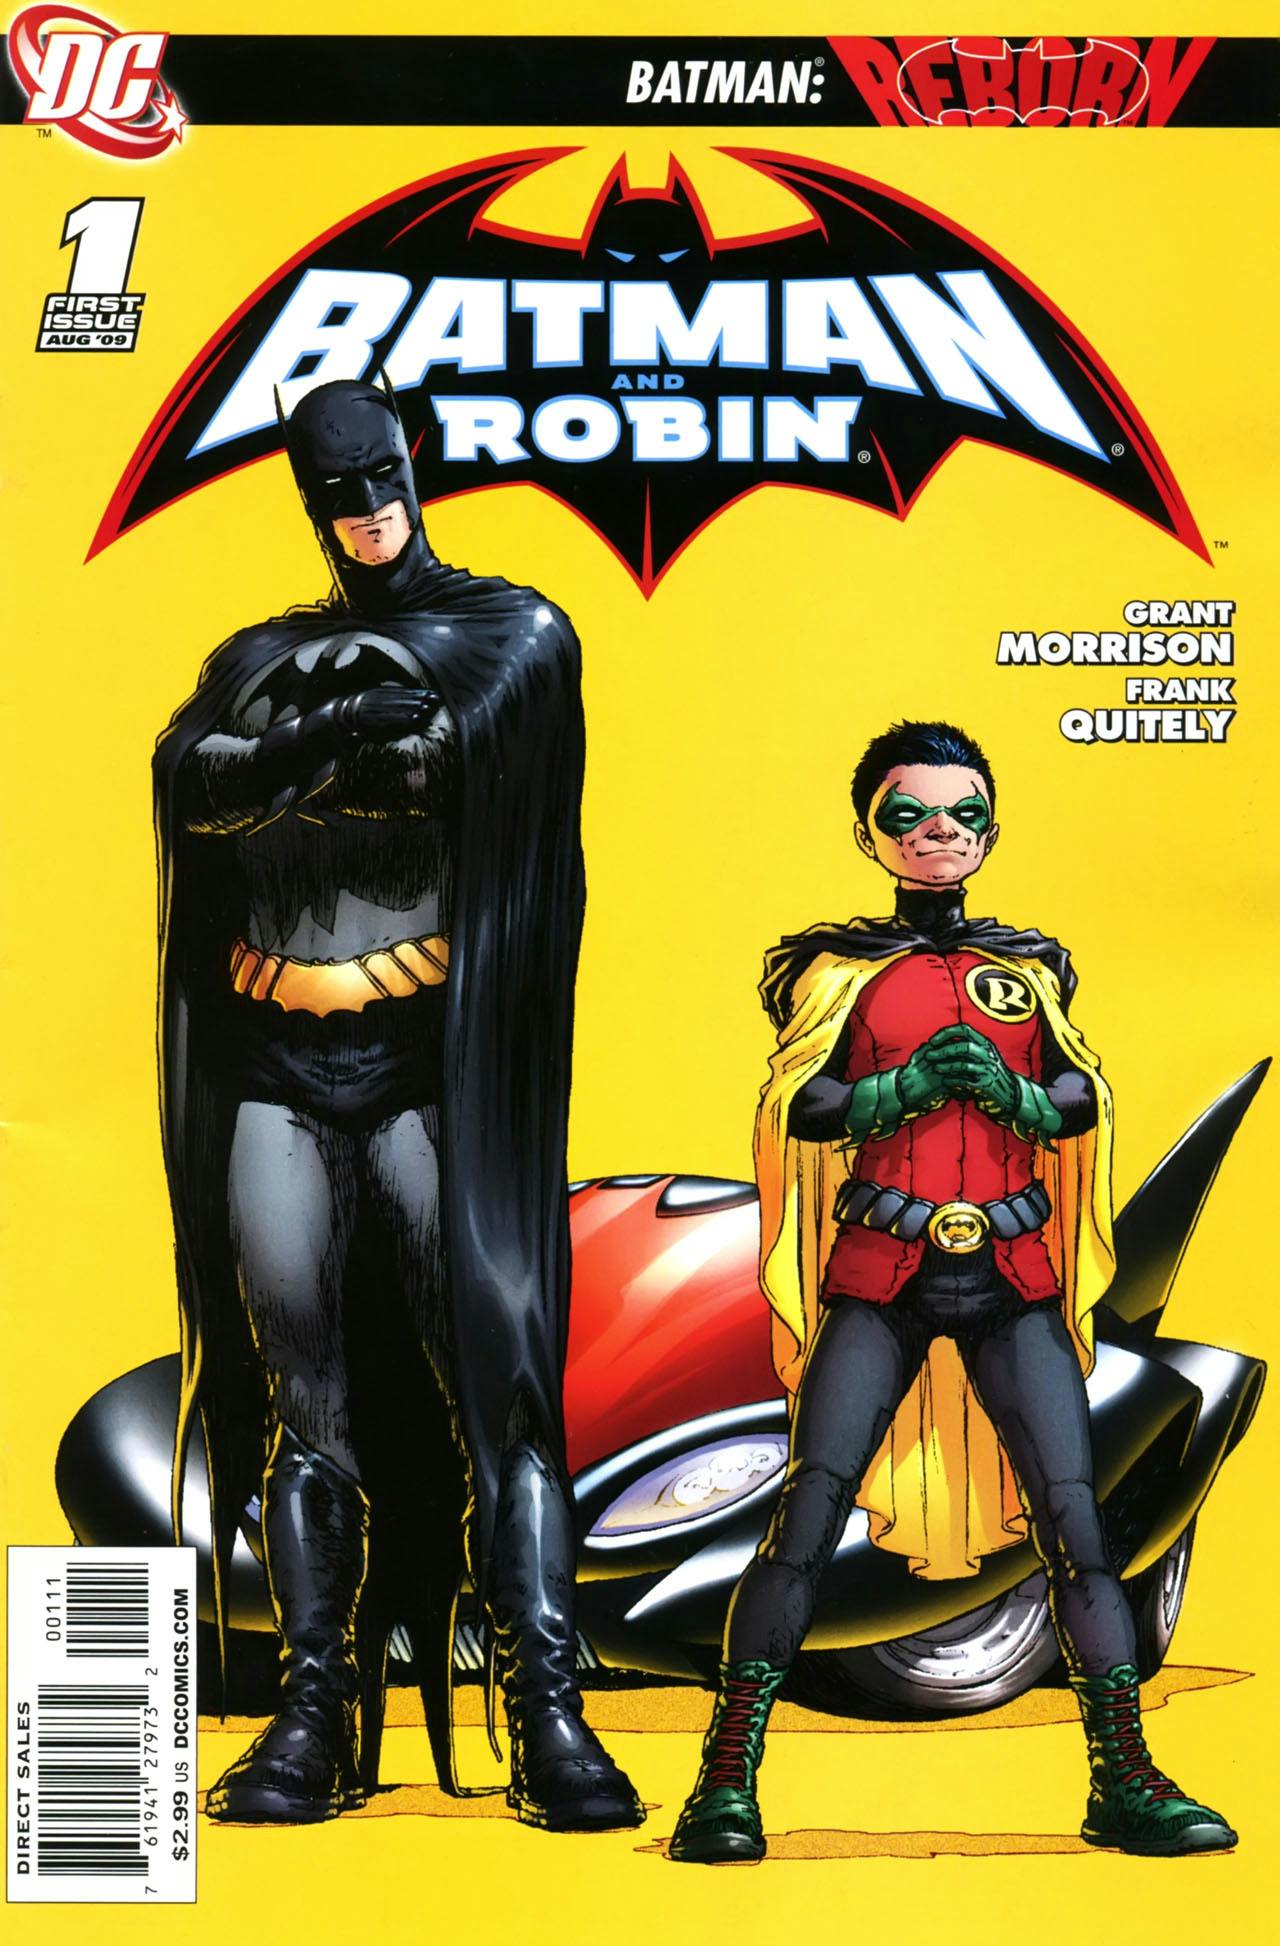 Batman and Robin by Grant Morrison and Frank Quitely